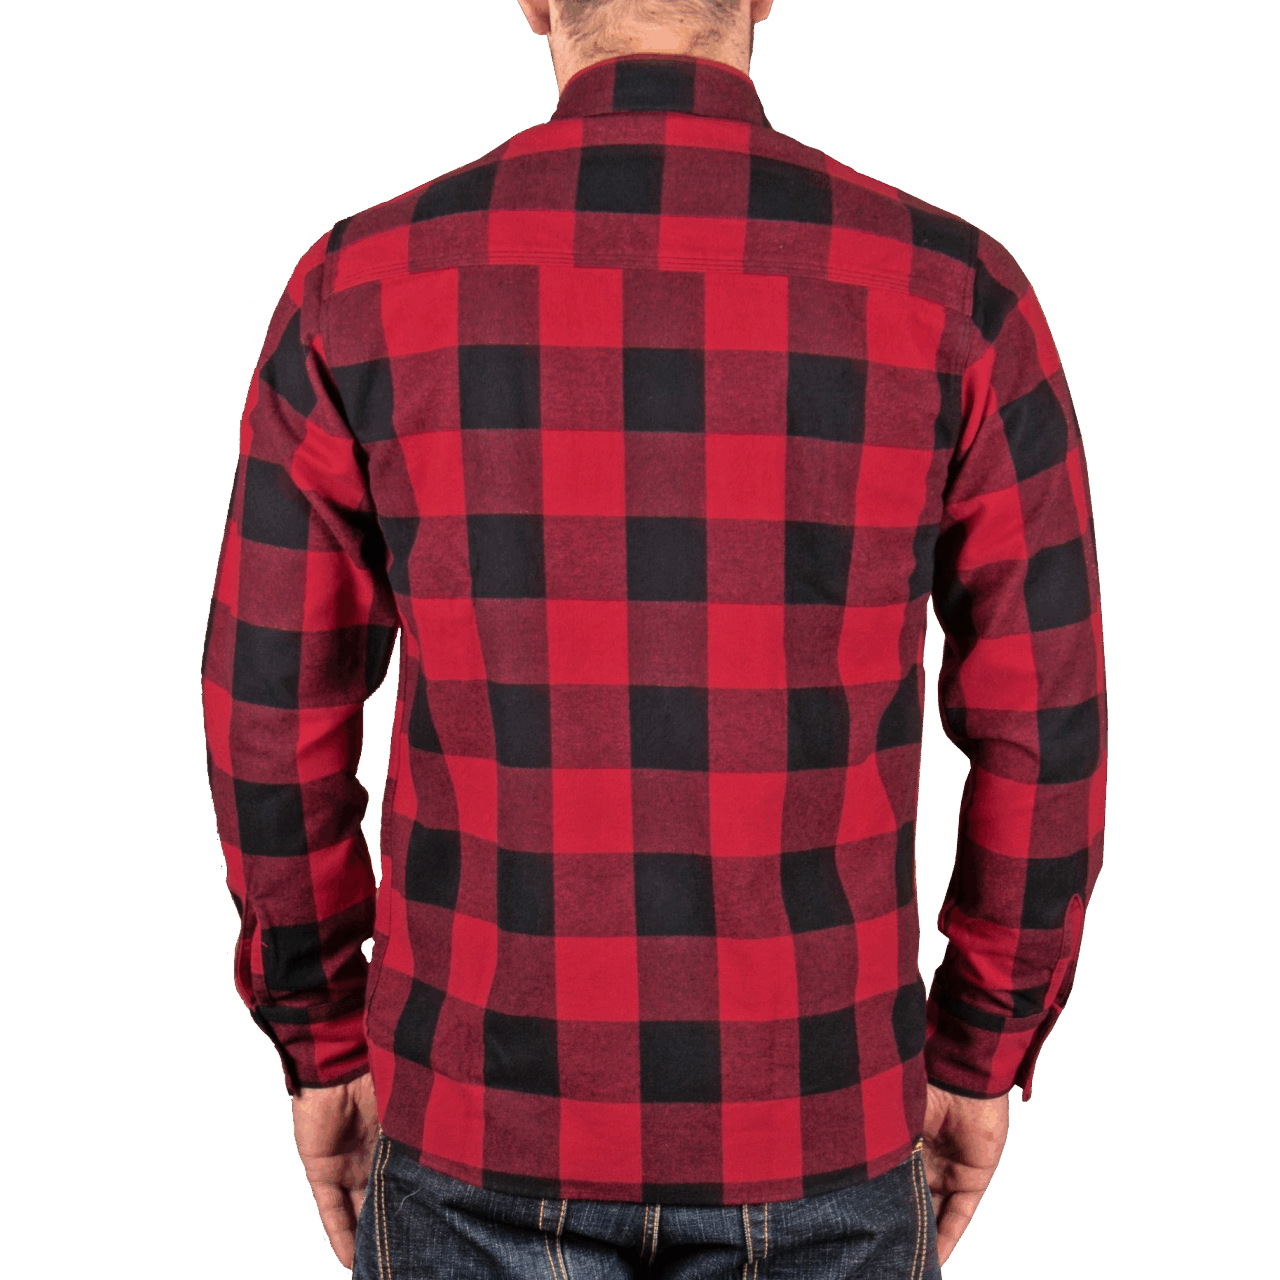 Pike Brothers 1943 CPO Shirt - Hoover Red